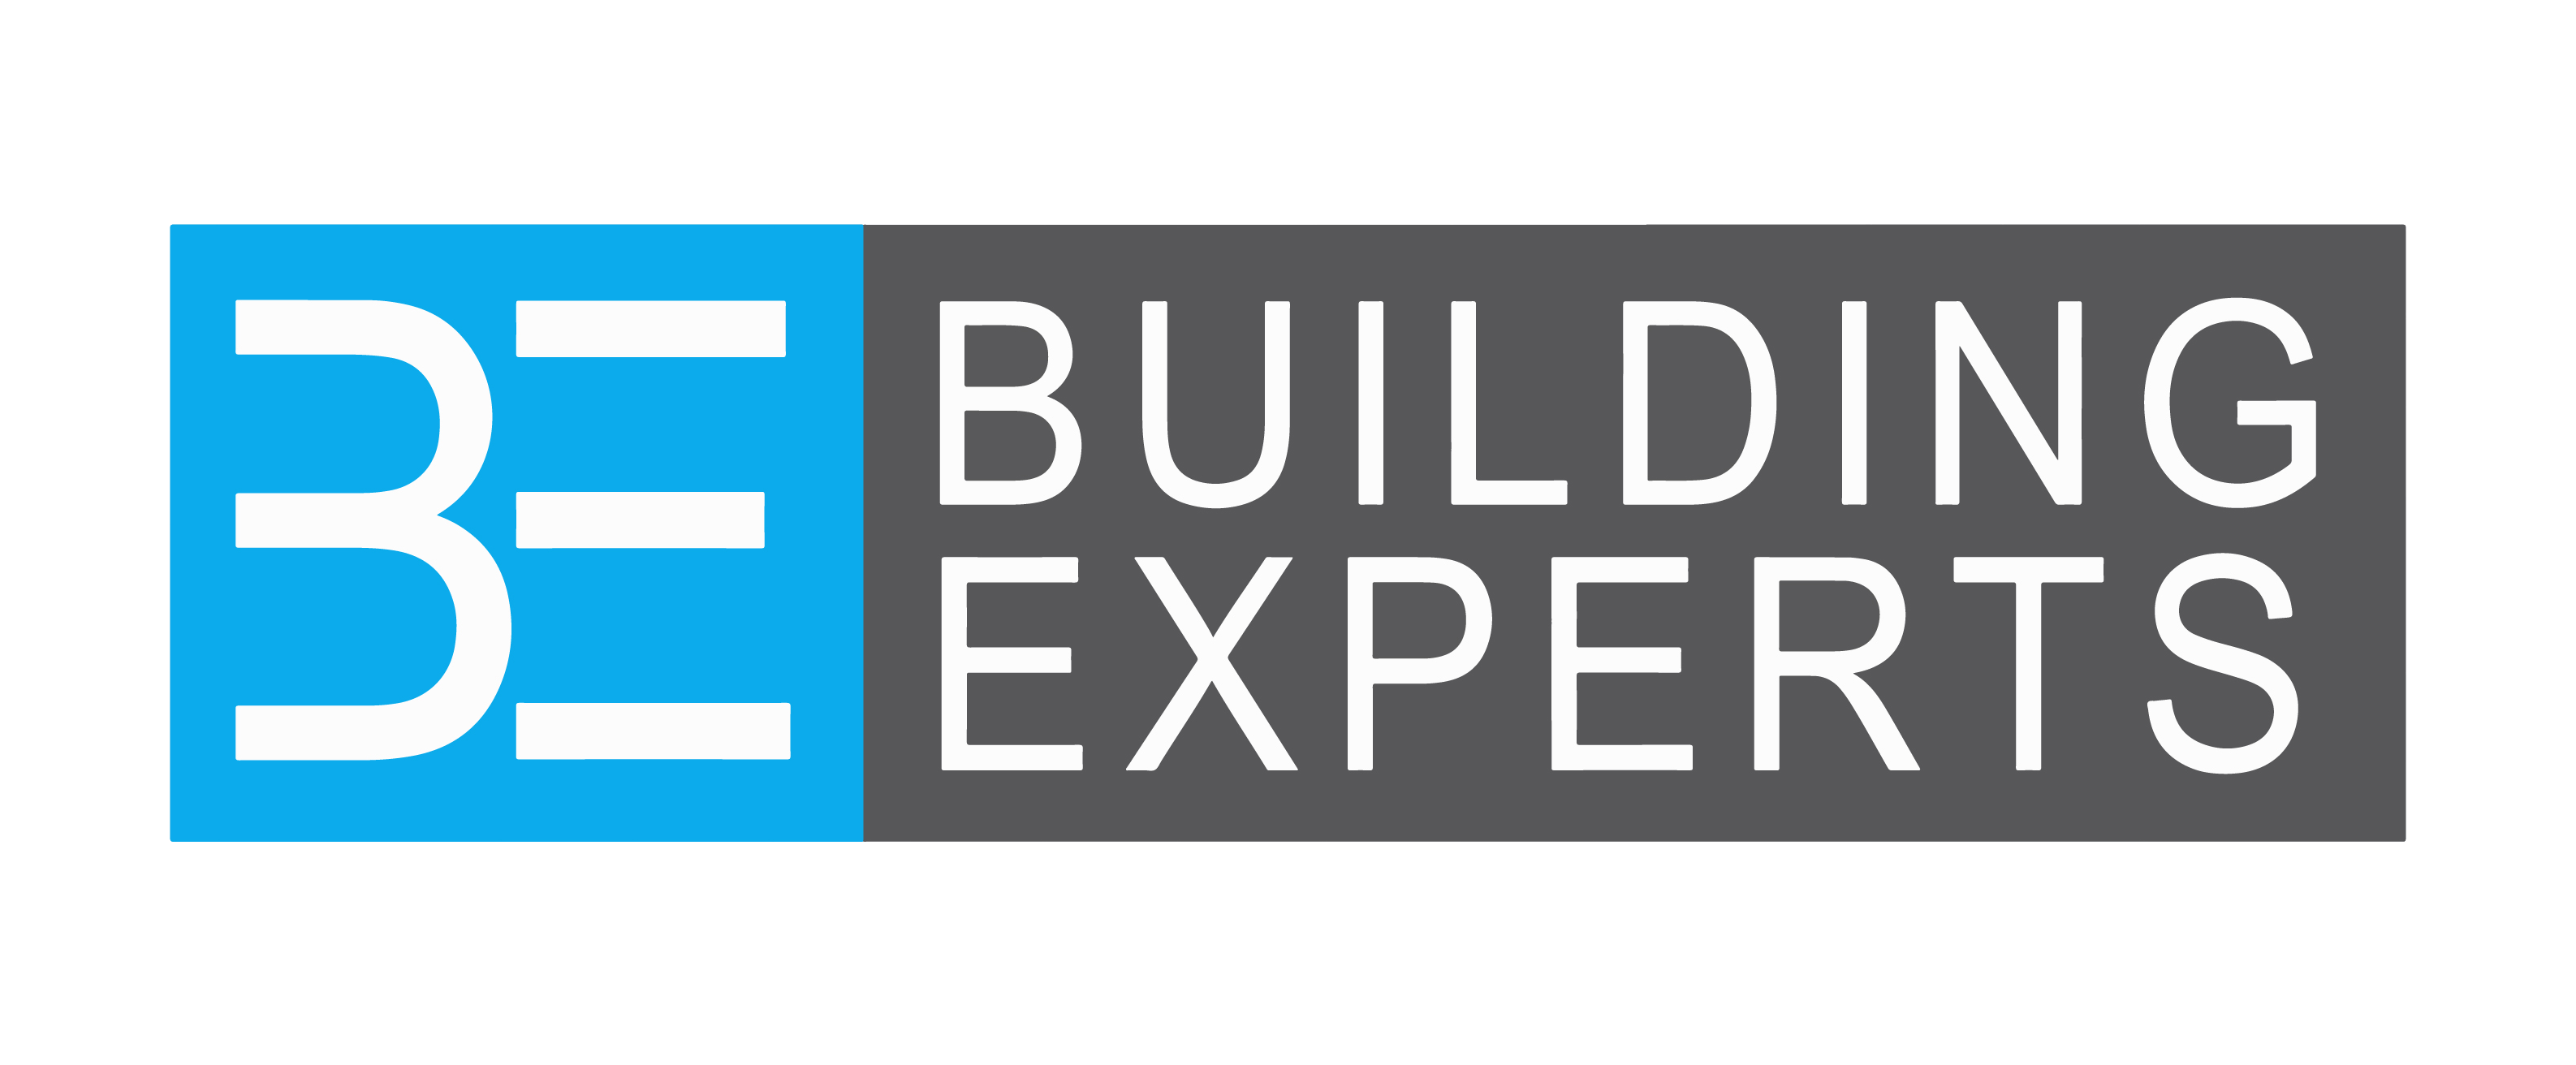 Buildings Experts